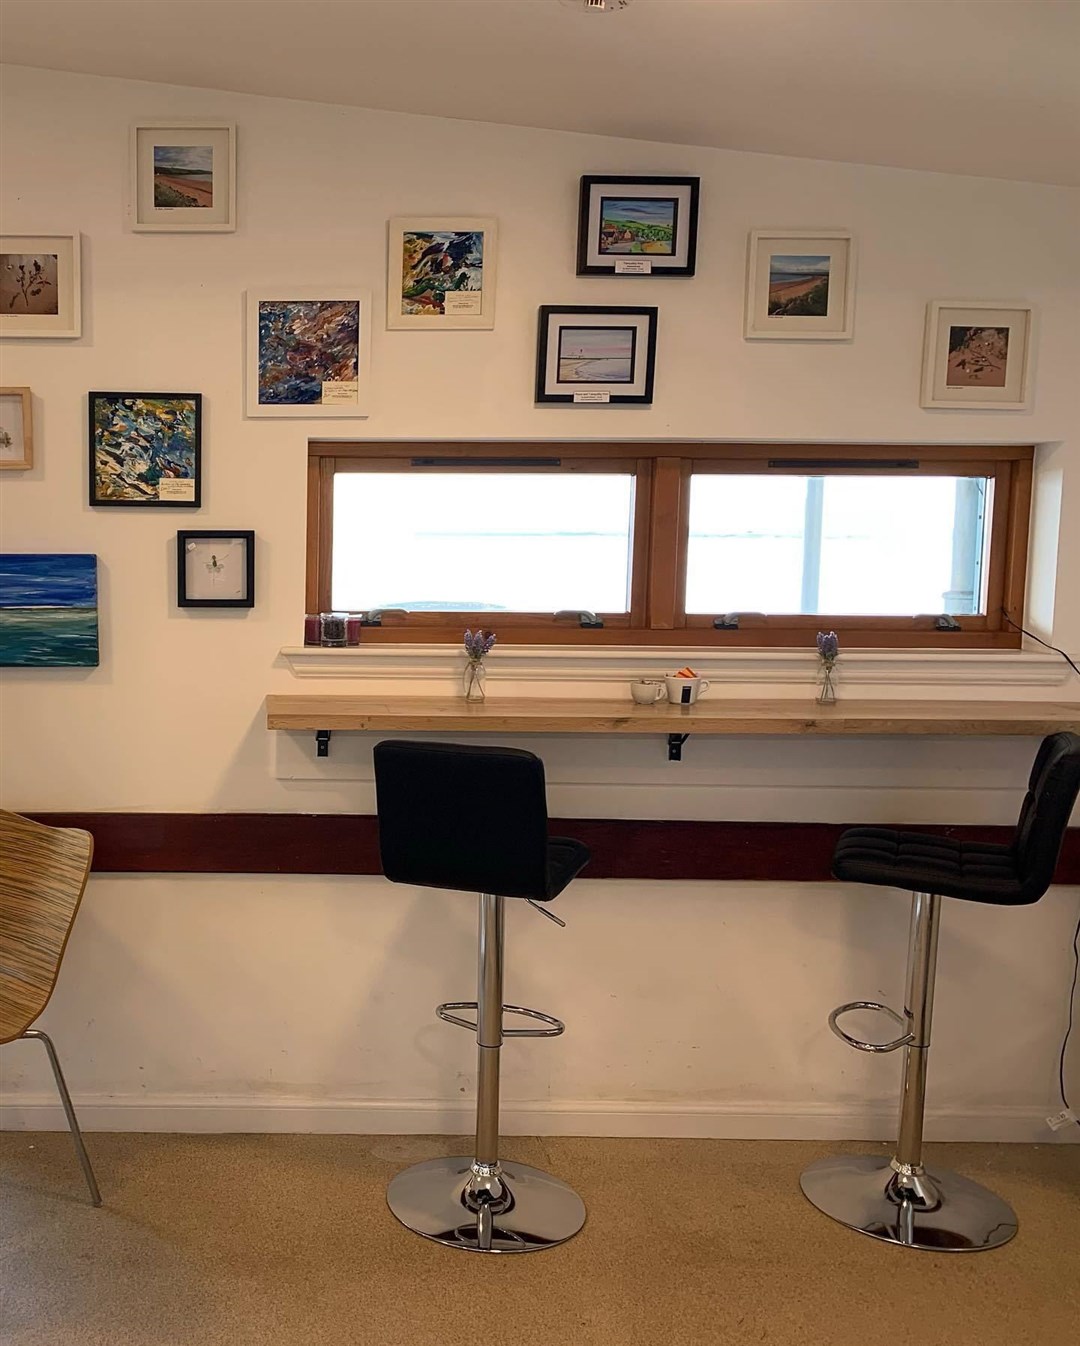 The beach cafe boasts a slick new look inside. Picture: Rosemarkie Amenities Association and Beach Cafe